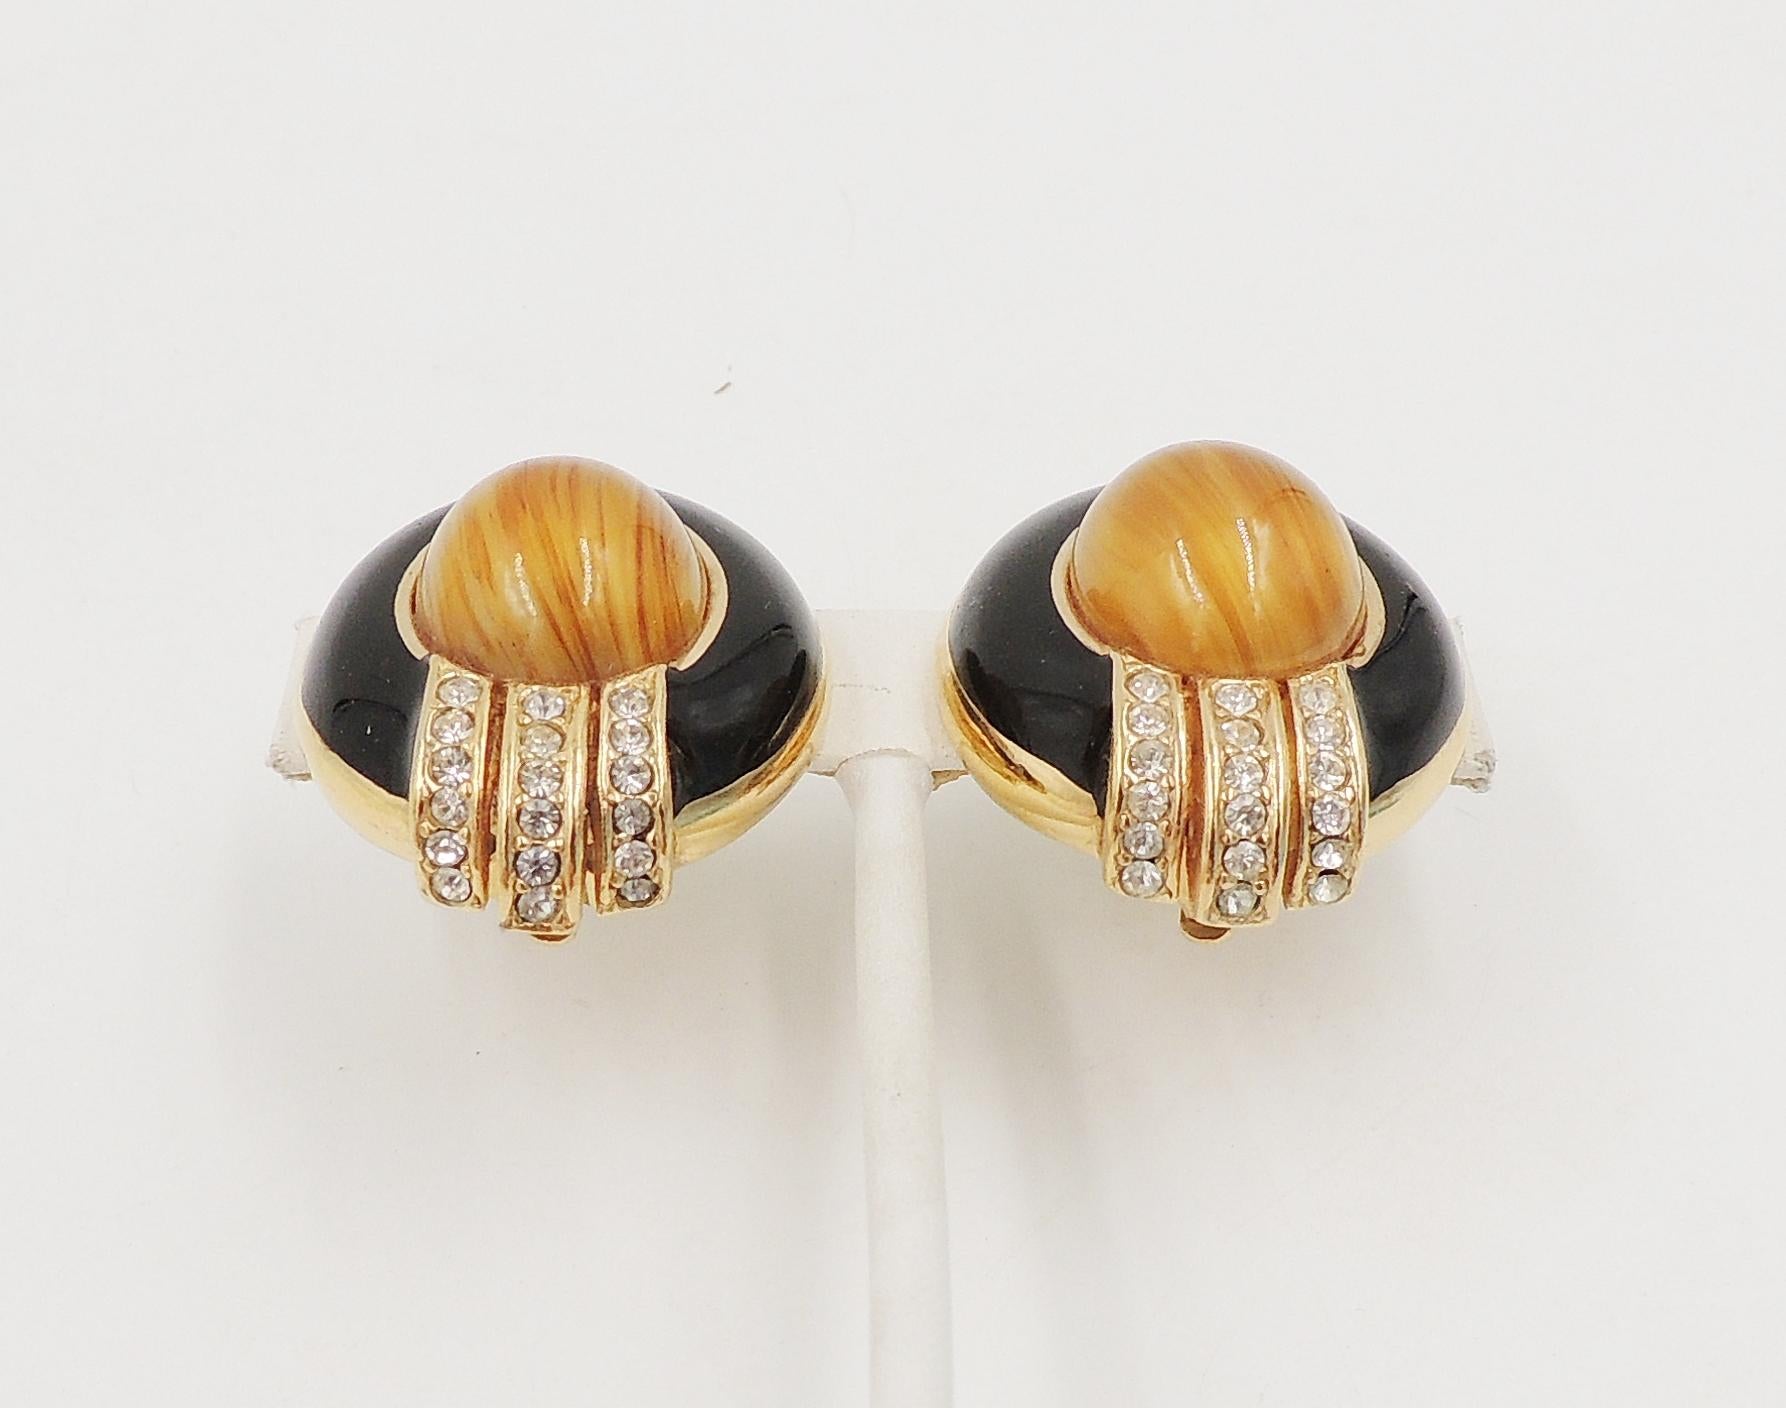 Vintage 1980s Signed Ciner Cabochon Faux-Agate & Black Enamel Earrings In Excellent Condition For Sale In Easton, PA